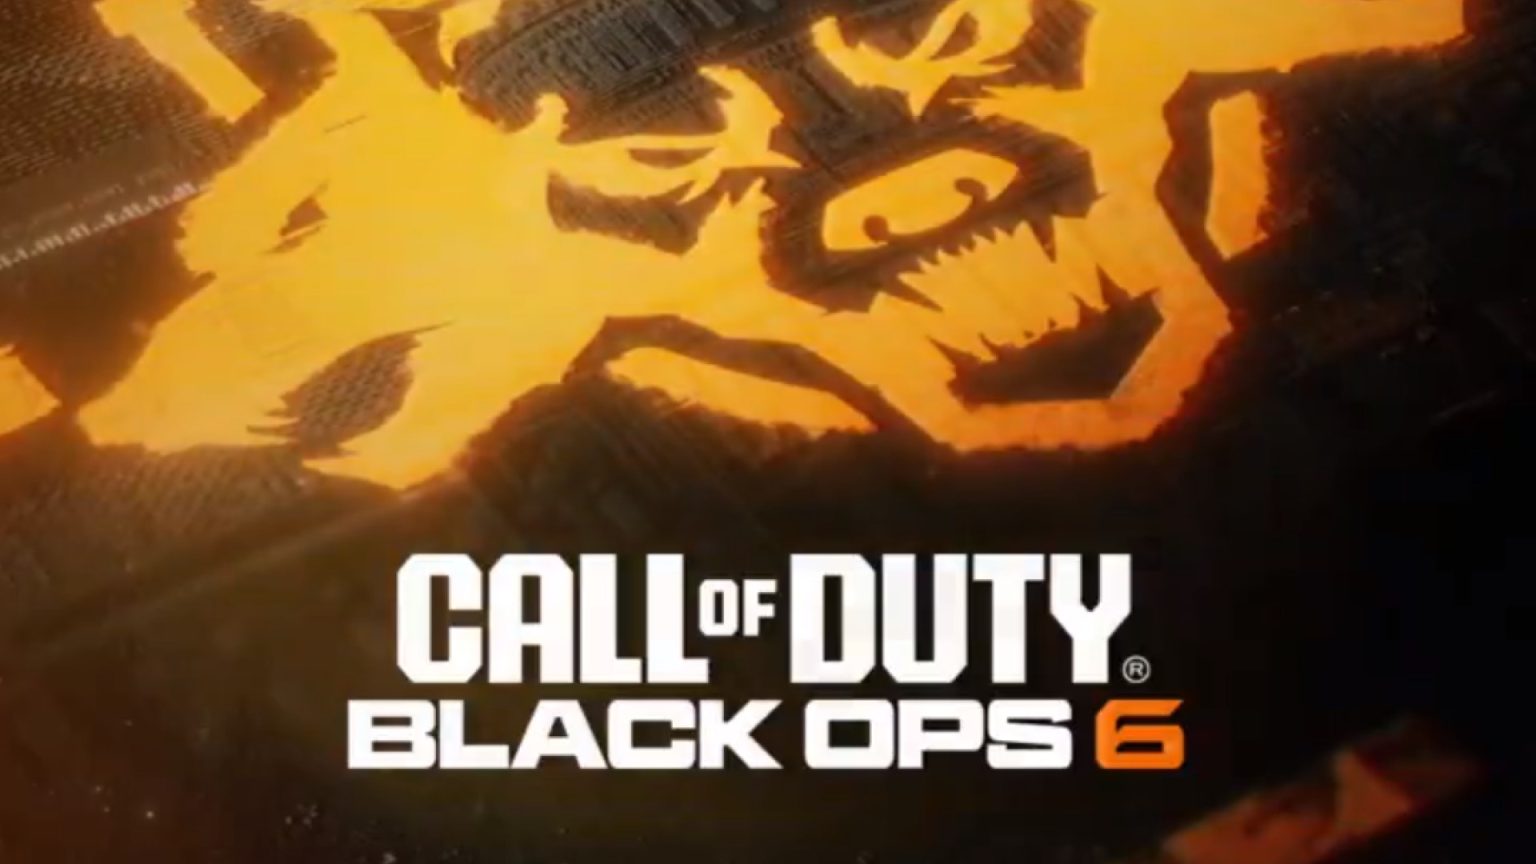 No one is forgotten: Call of Duty: Black Ops 6 looks set to be available on Xbox One and PlayStation 4